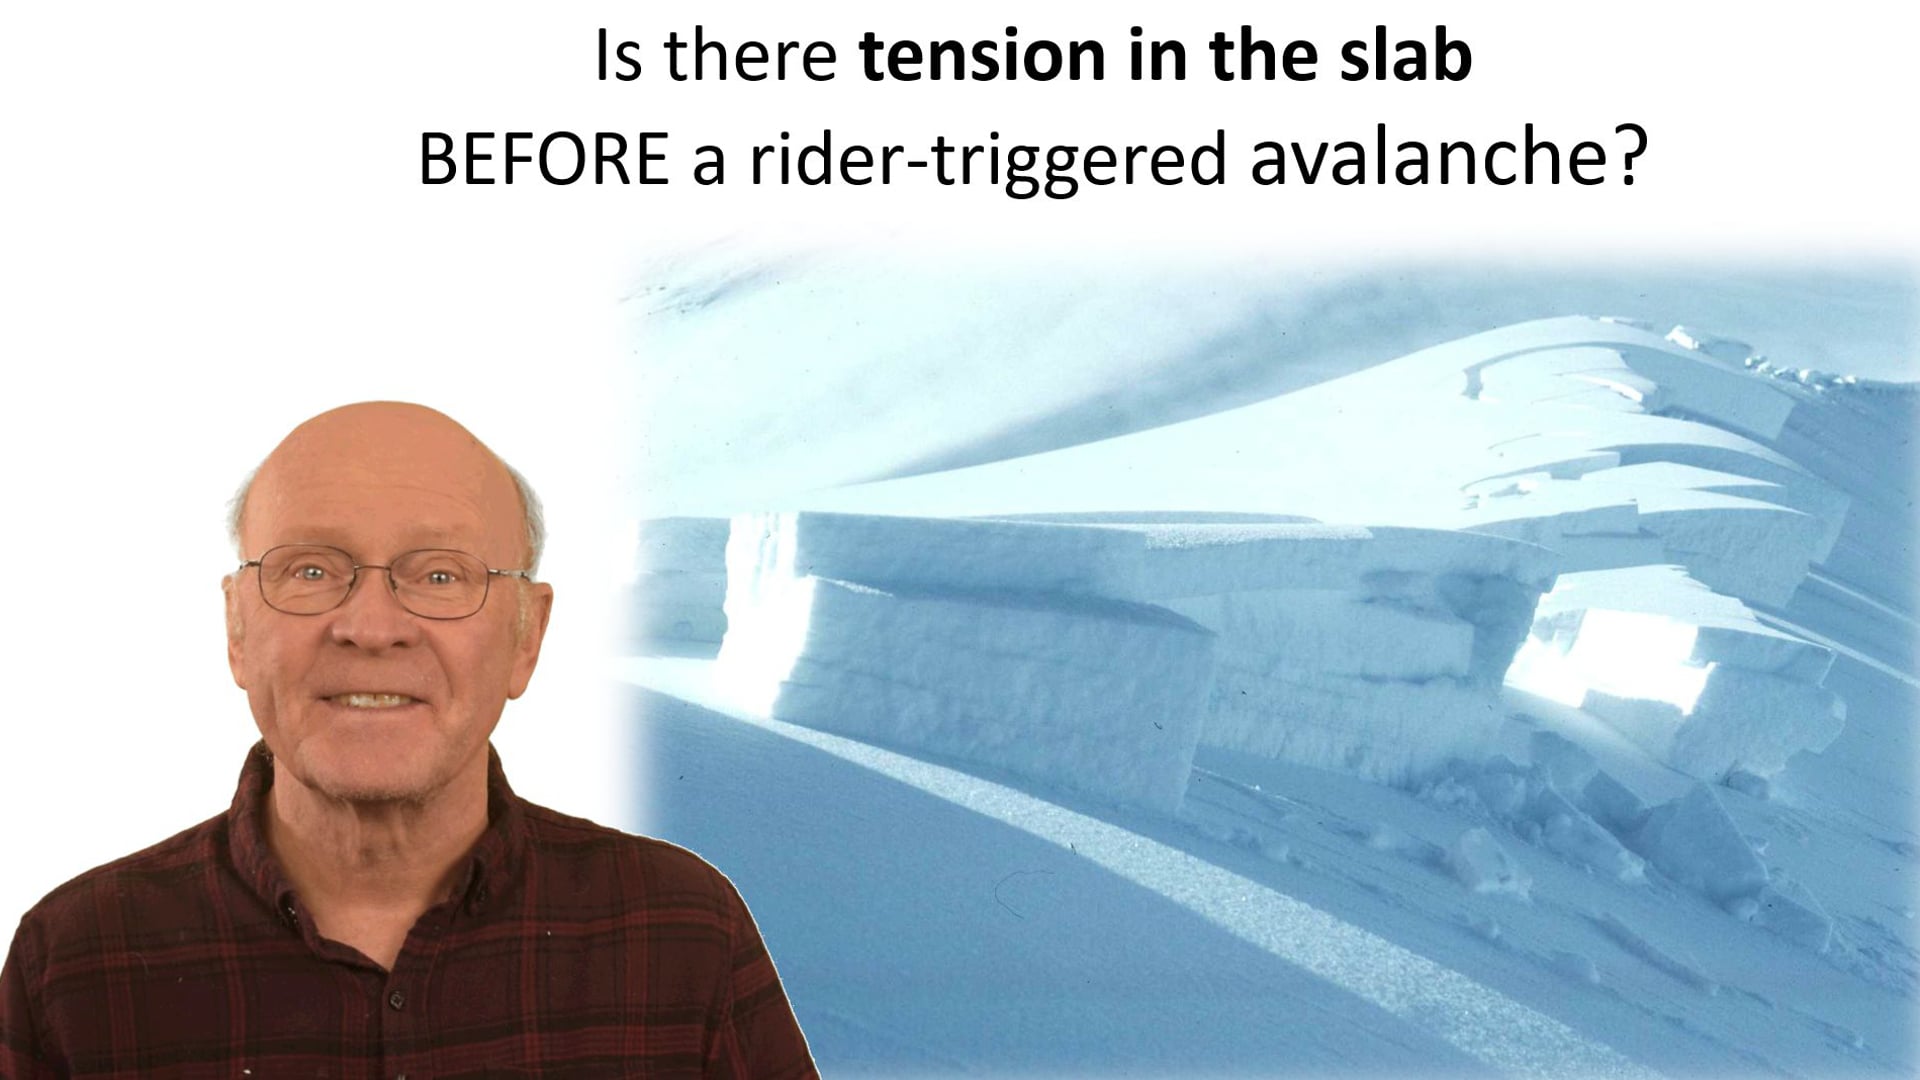 Is slab tension a condition that makes rider-triggered avalanches more likely?